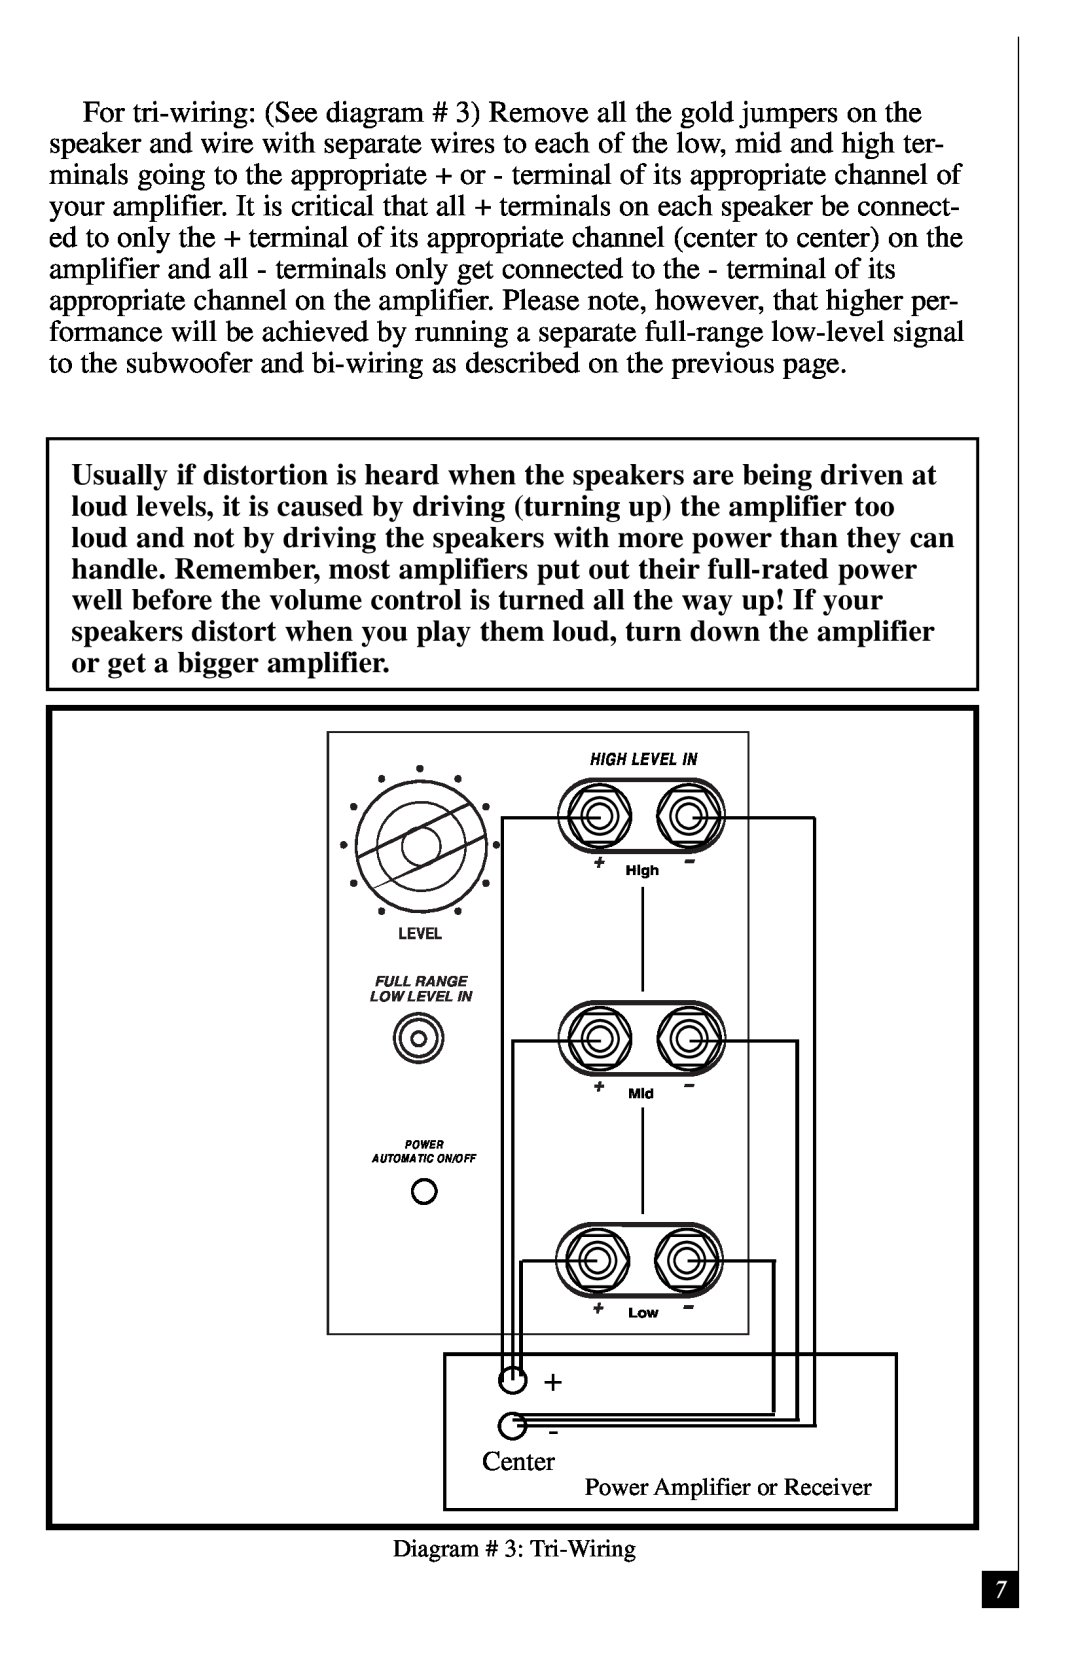 Definitive Technology 3000 owner manual Power Amplifier or Receiver, Diagram # 3 Tri-Wiring, Low Level In 